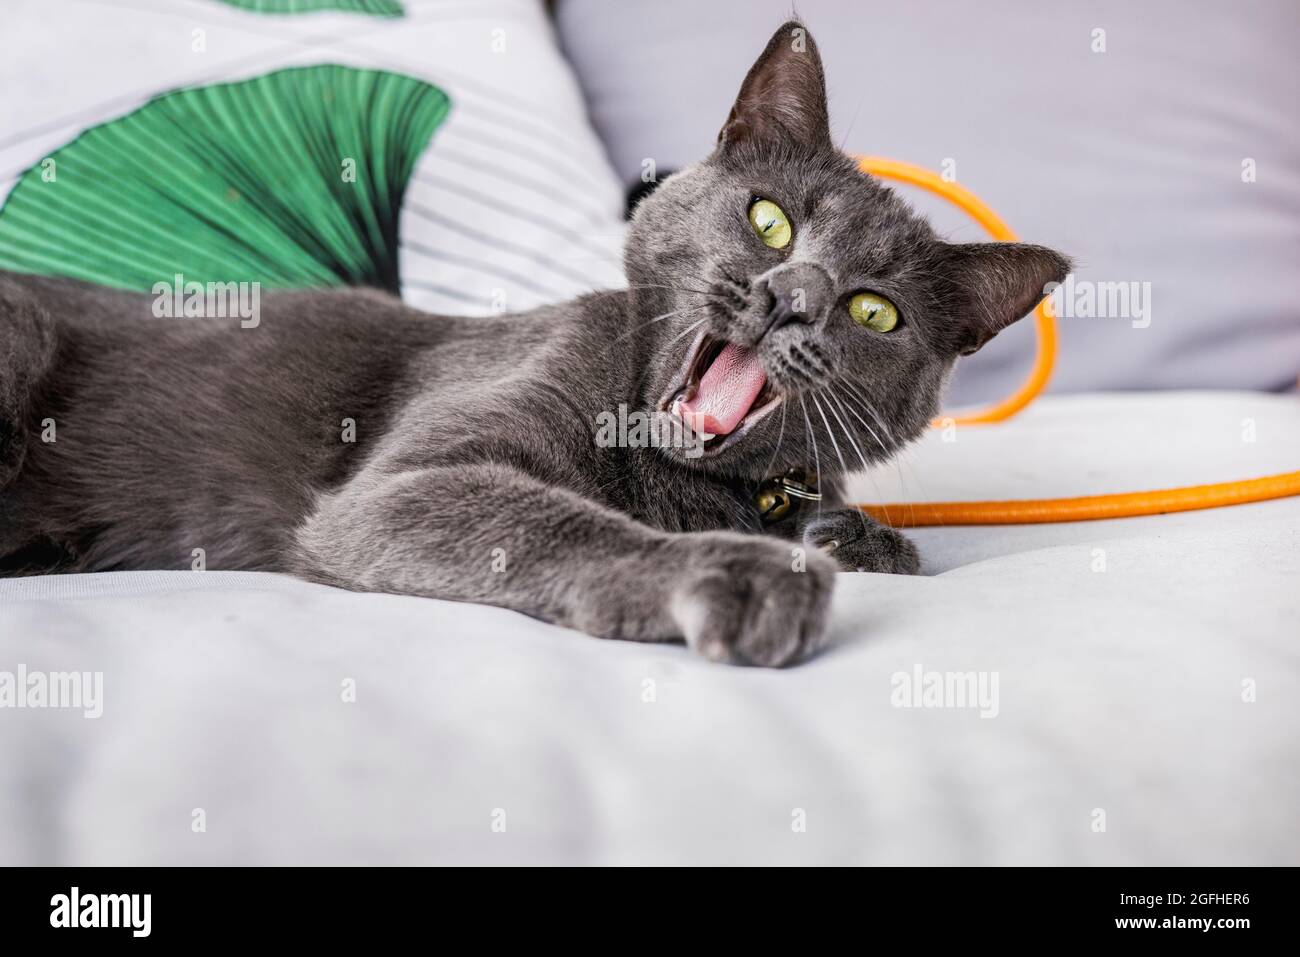 A young gray Russian Blue cat on an outdoor sofa with mouth open and an energetic, humorous expression looking at camera. Stock Photo